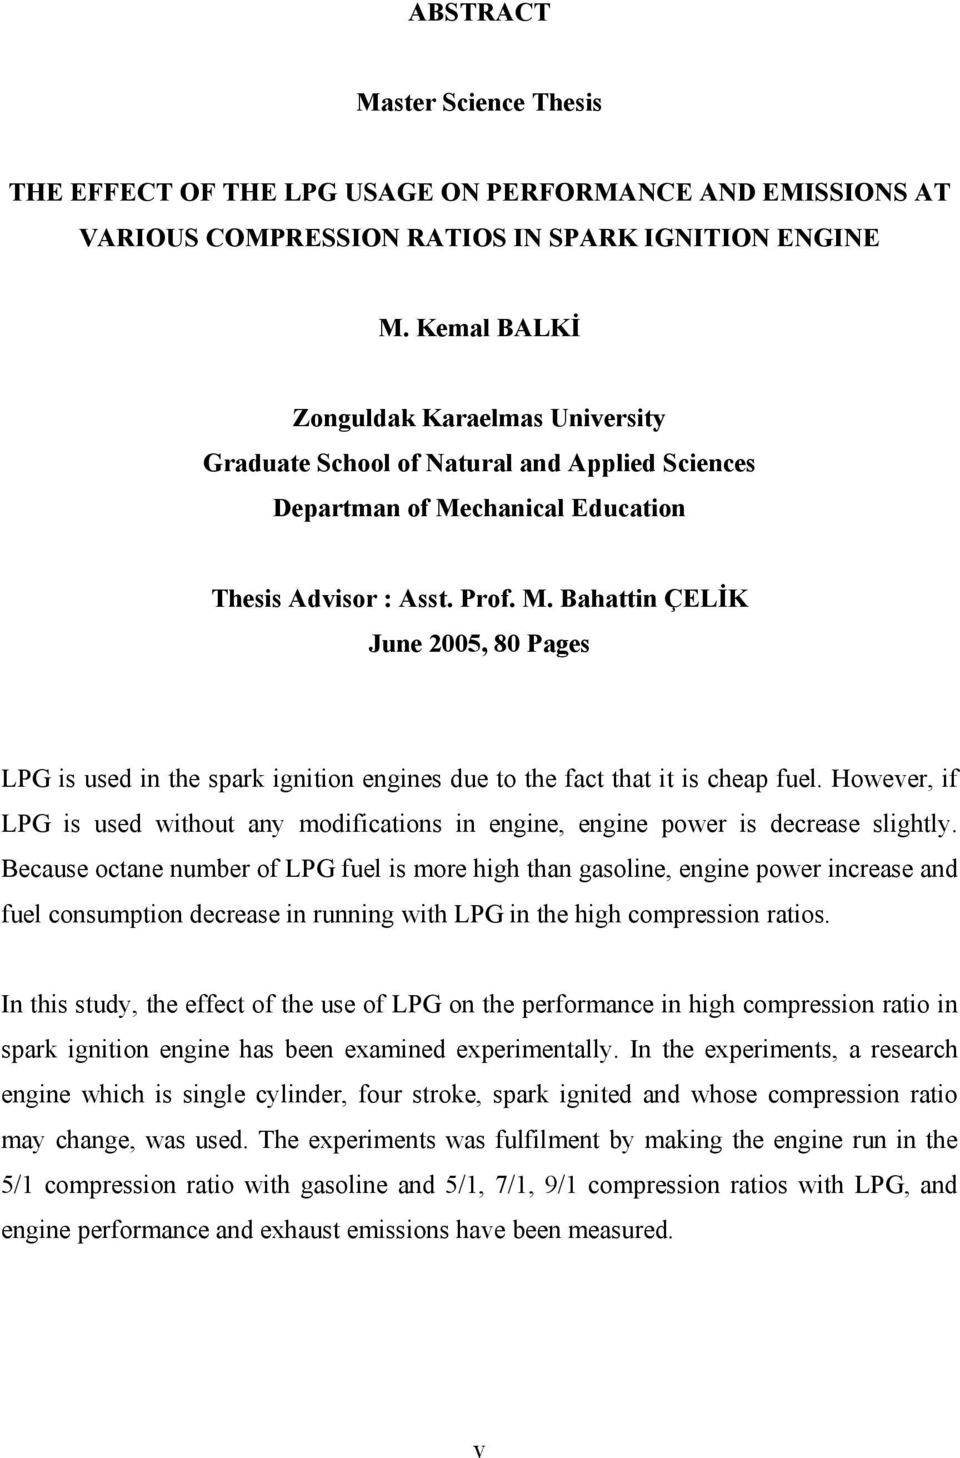 chanical Education Thesis Advisor : Asst. Prof. M. Bahattin ÇELİK June 2005, 80 Pages LPG is used in the spark ignition engines due to the fact that it is cheap fuel.